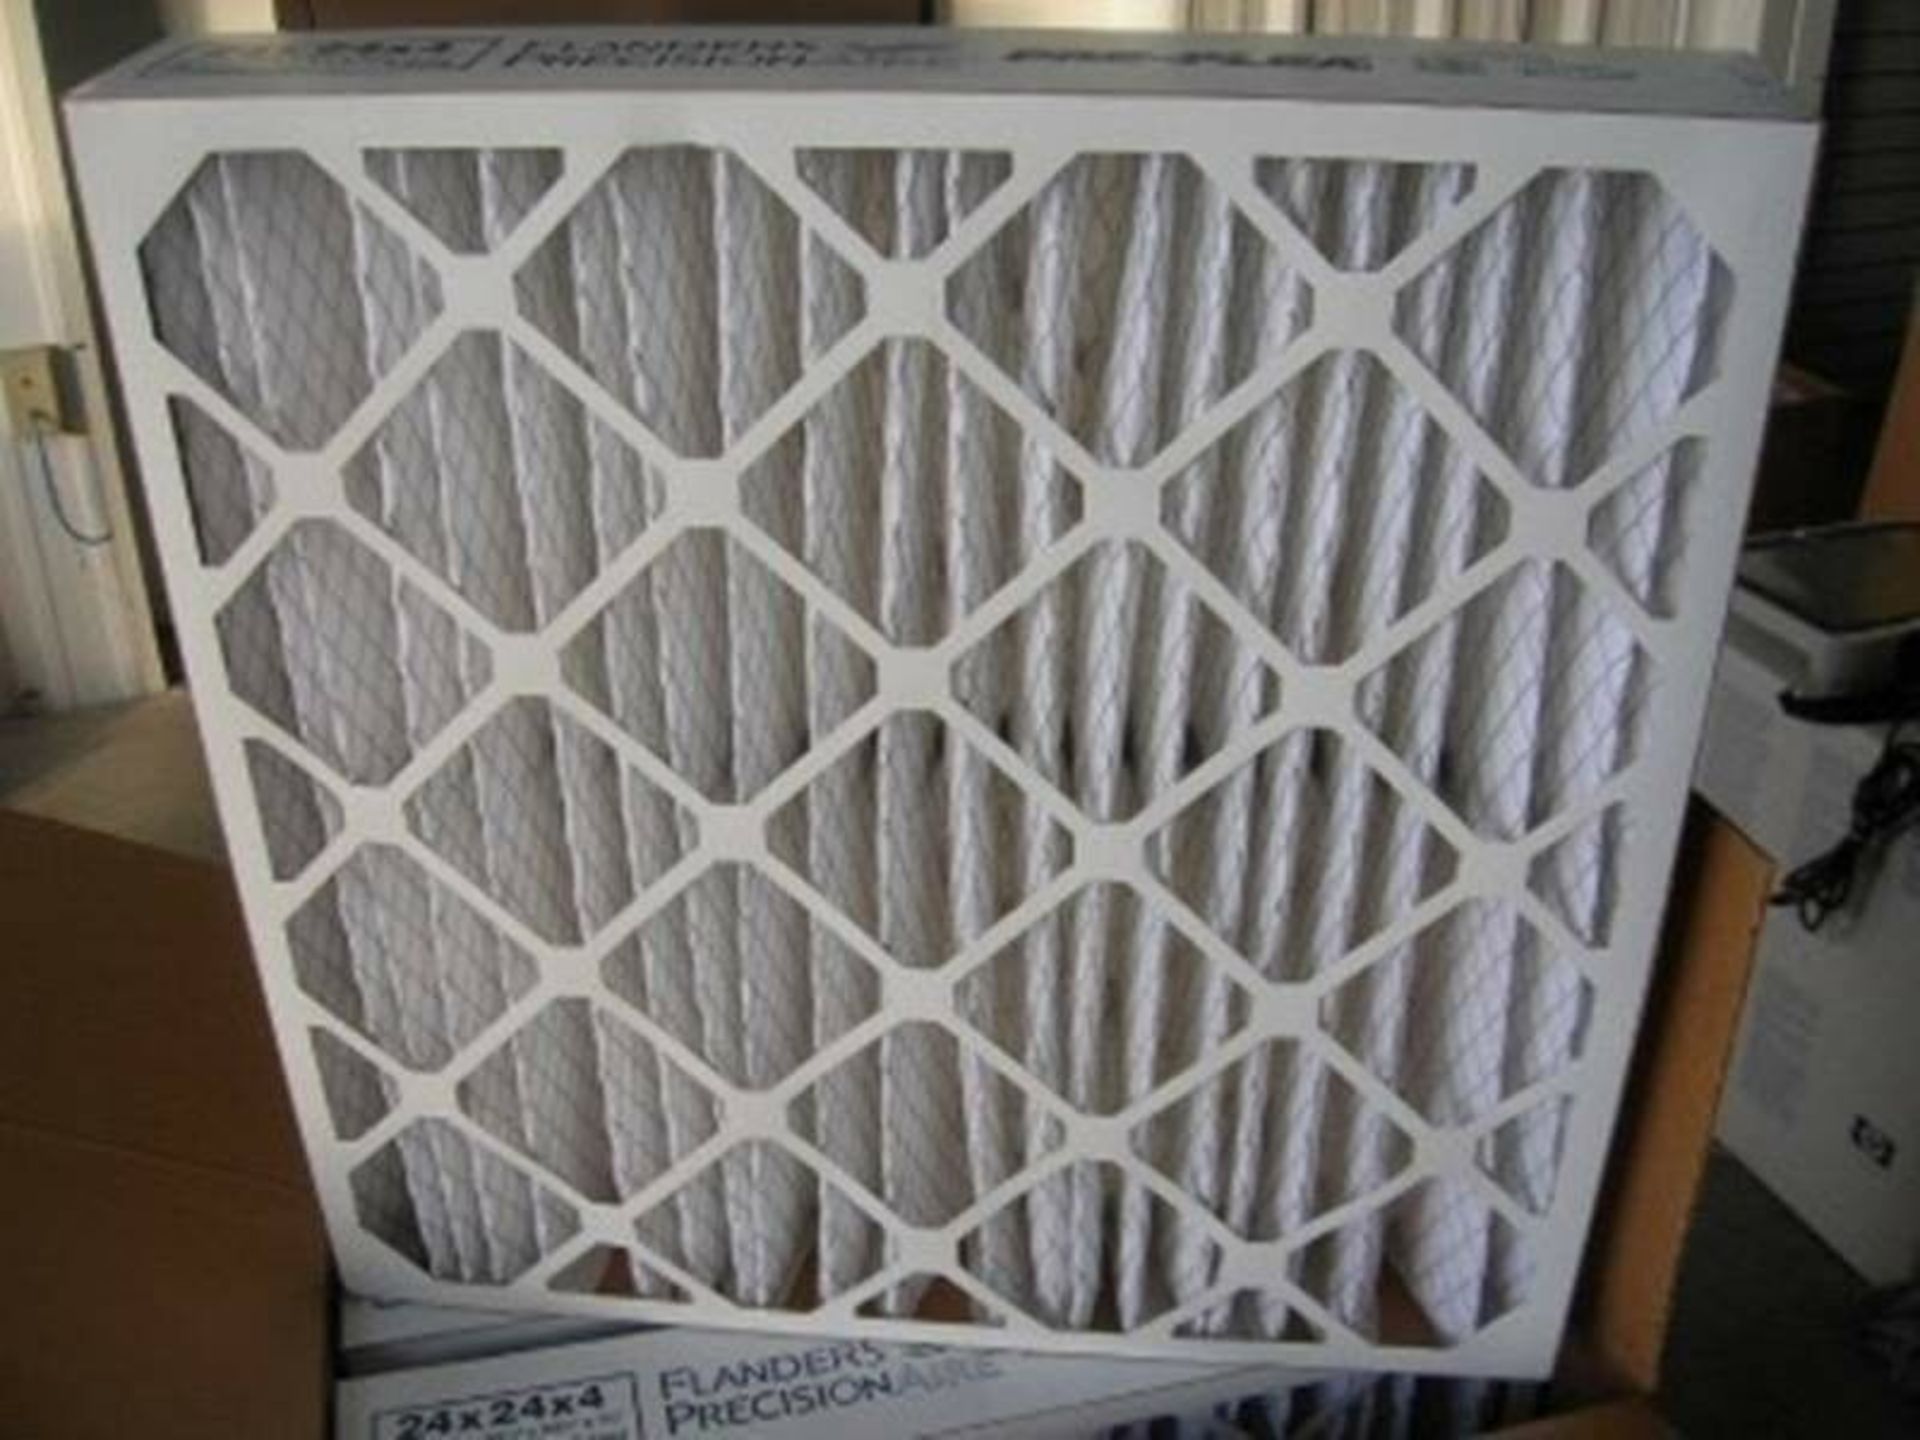 Flanders Precision Aire 24x24x4 Furnace / AC High Capacity Air Filter 6 Pack NEW - Image 4 of 4